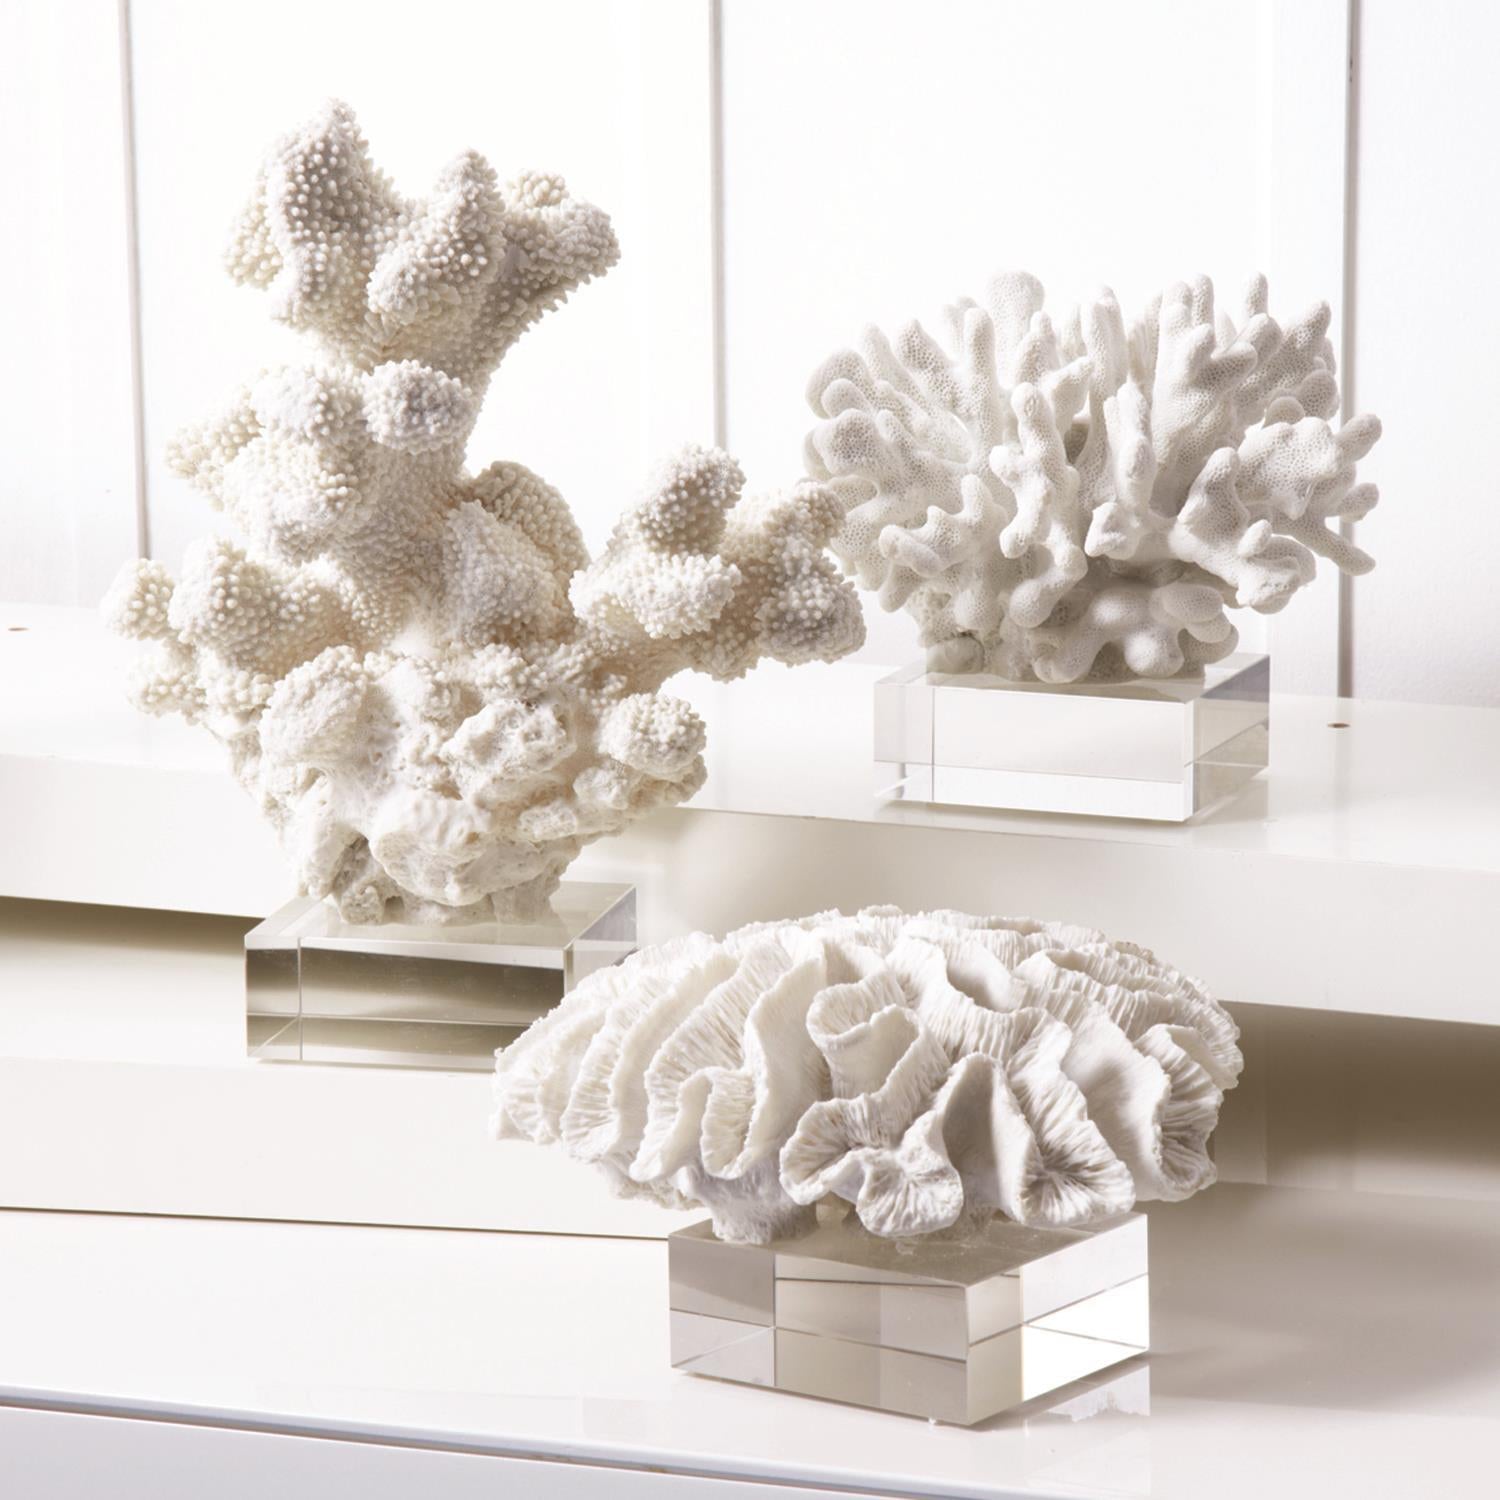 Two's Company Reef White Coral Sculptures on Glass Stand (set of 3)